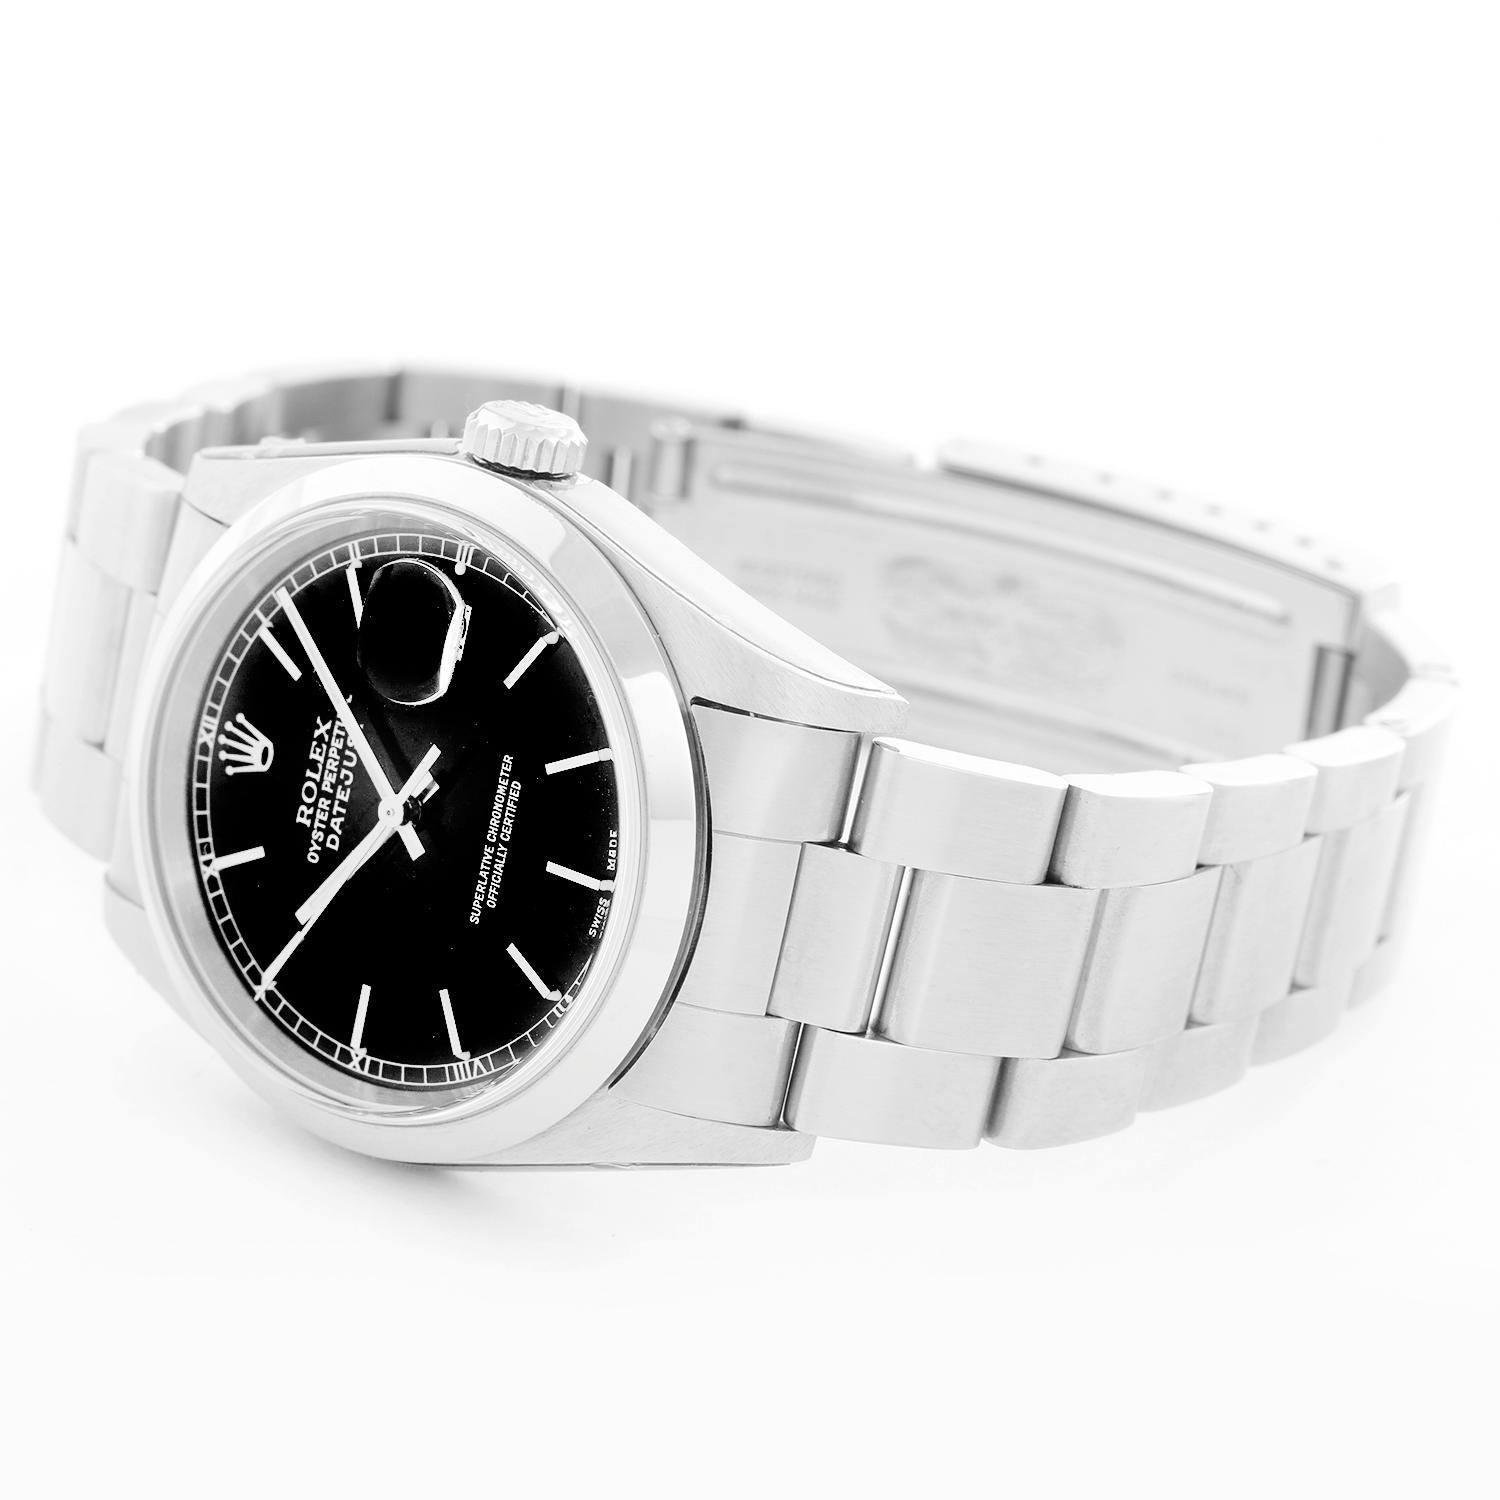 Collectors Edition Rolex Datejust Men's Stainless Steel Watch 16200 - Automatic winding, Quickset, sapphire crystal. Stainless steel case with smooth bezel (36mm diameter). Black dial with stick numerals. Stainless steel Oyster bracelet. New old